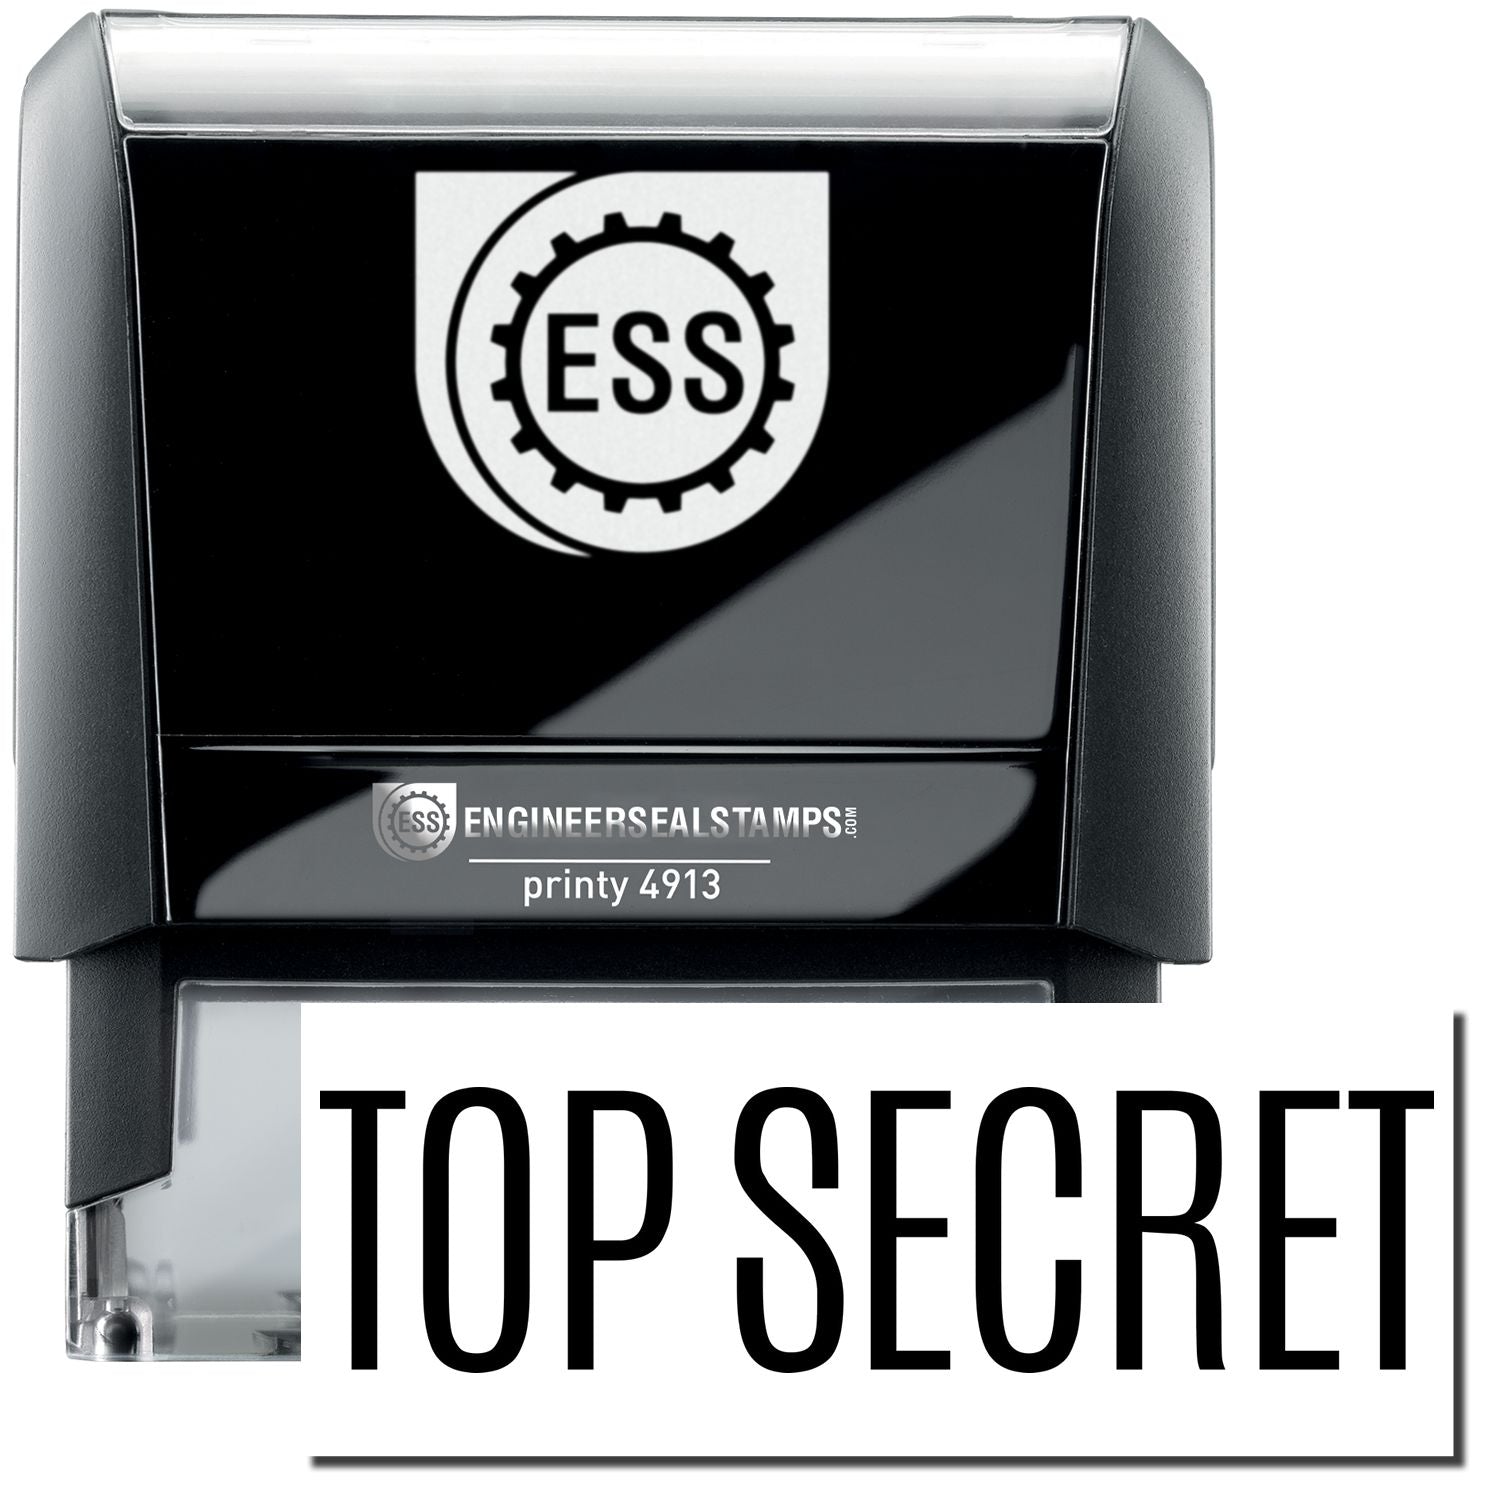 A self-inking stamp with a stamped image showing how the text "TOP SECRET" in a large font is displayed by it after stamping.